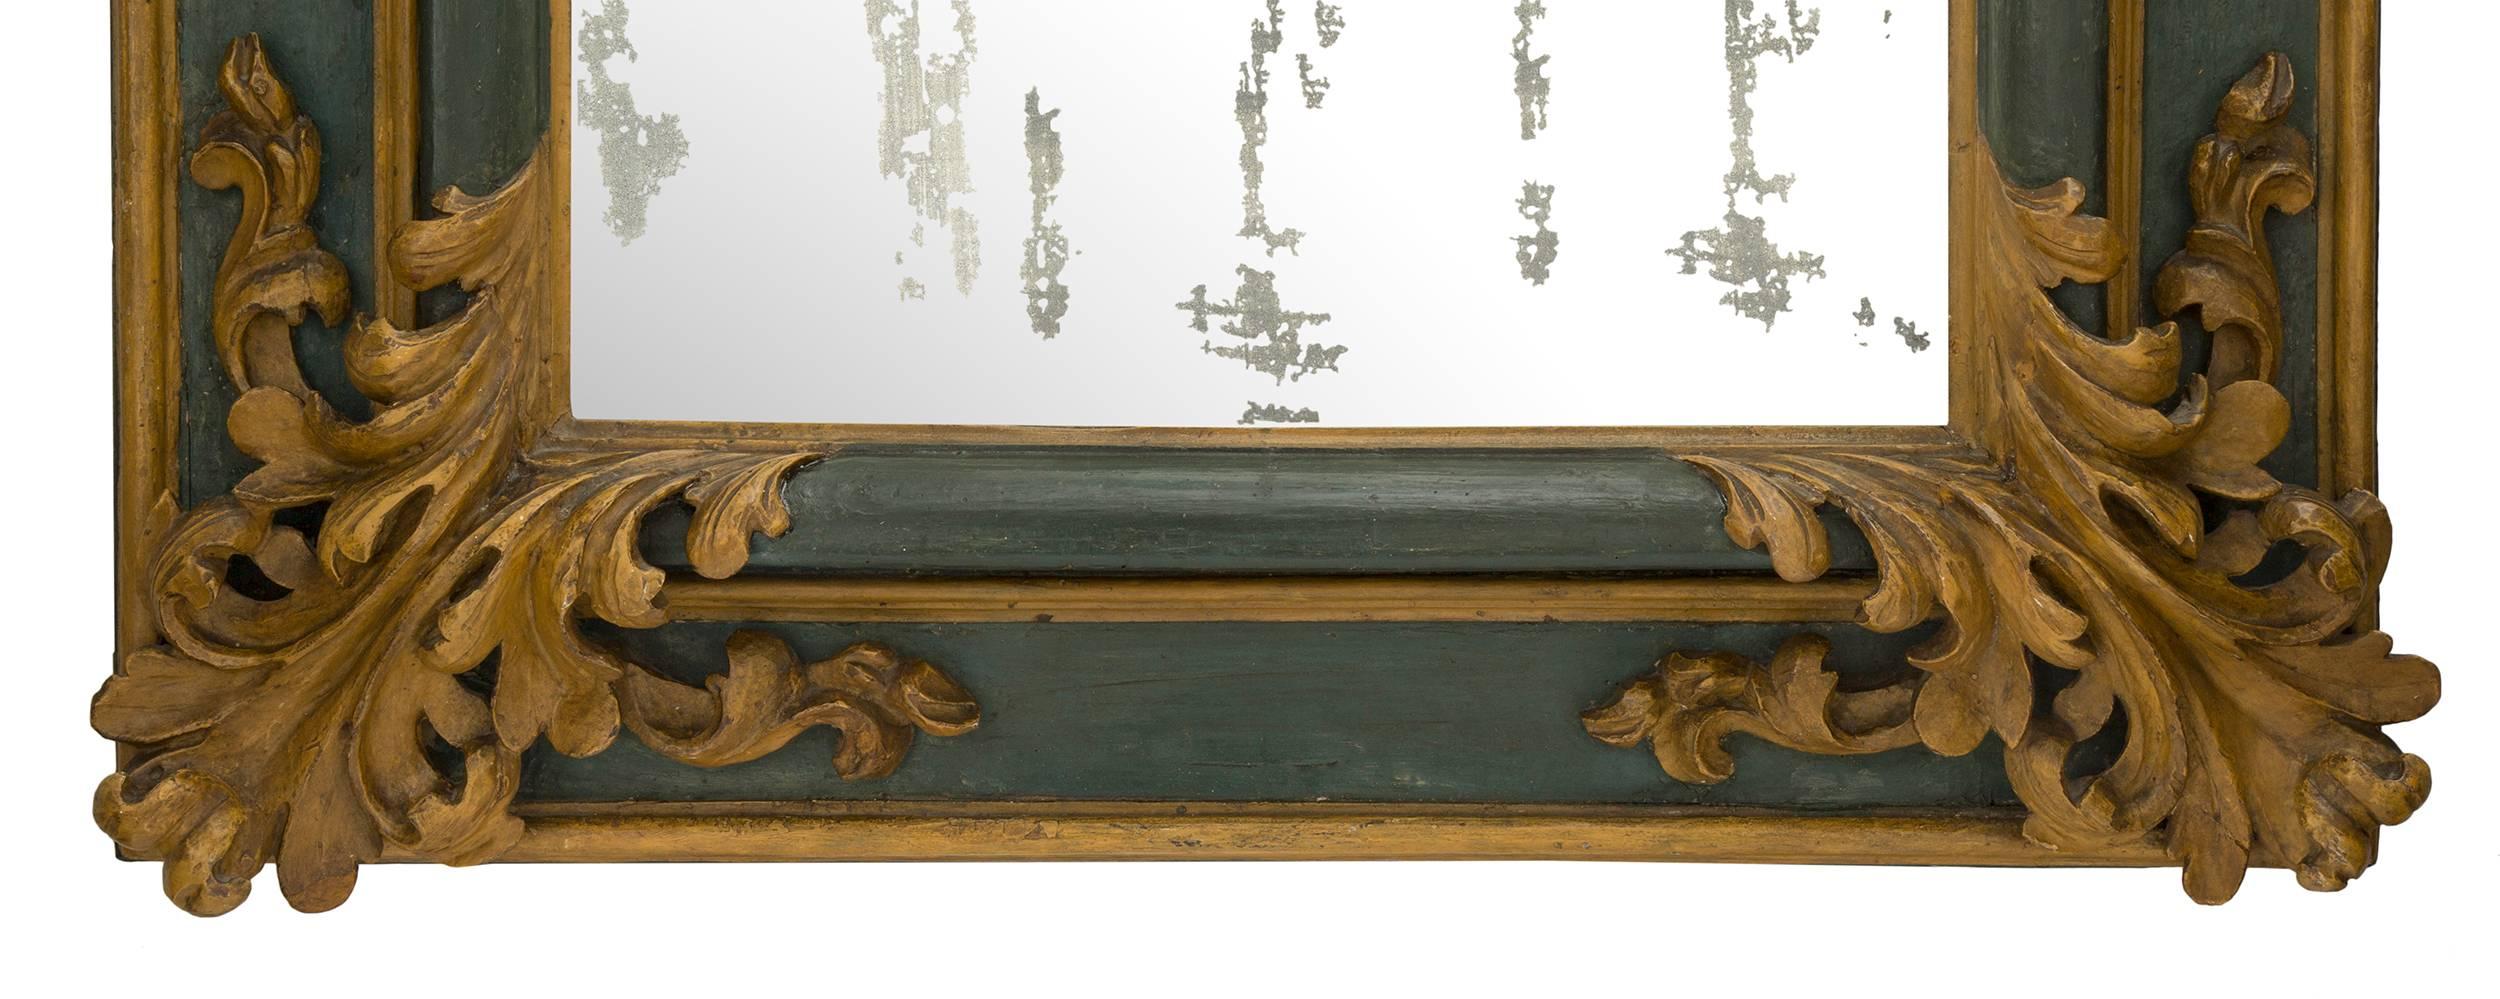 A pair of very handsome and unique Italian 17th century Baroque period patinated mirrors. Each mirror has a dark green patinated frame with molded edge golden borders. At each corner is a large very opulent and wonderfully carved scrolled golden